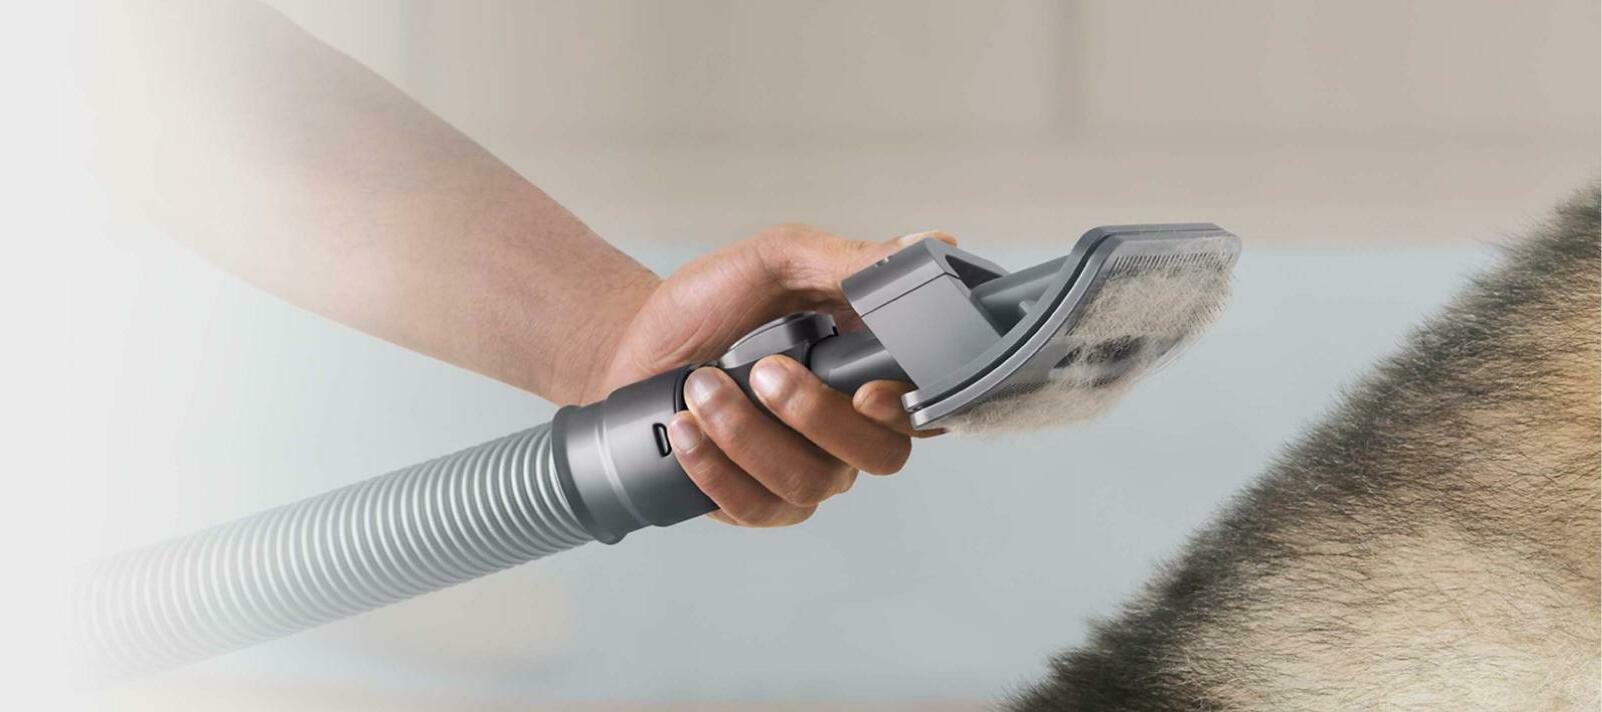 Thoughts on the pet grooming kit/tool?